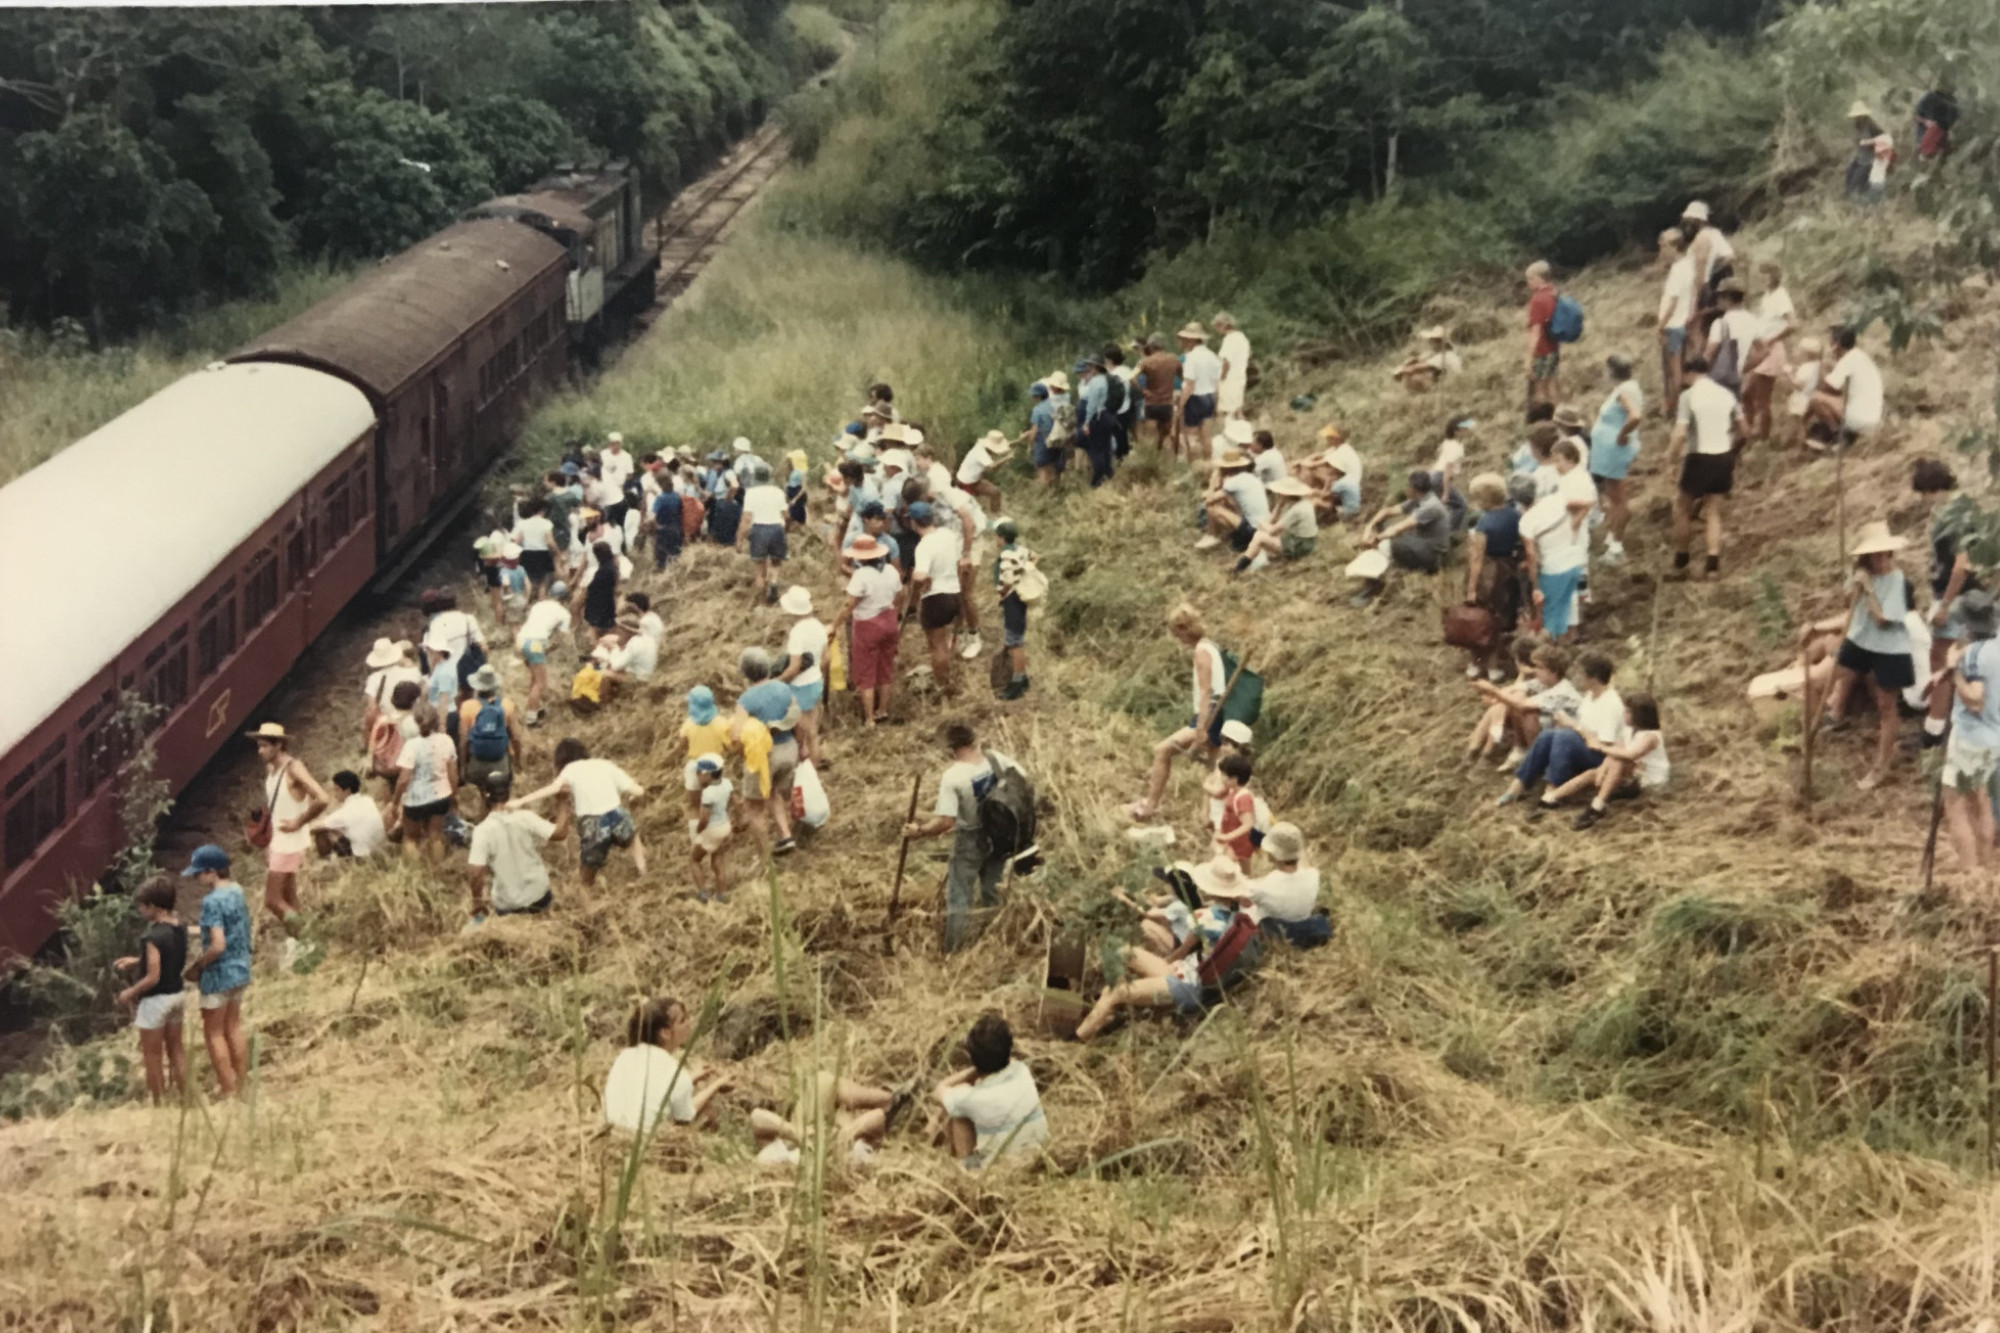 The first Treeforce event, held in 1991, was the Tree Train, which transported members of the community to plant a strip of rainforest species above the Cairns to Kuranda railway line in Redlynch.